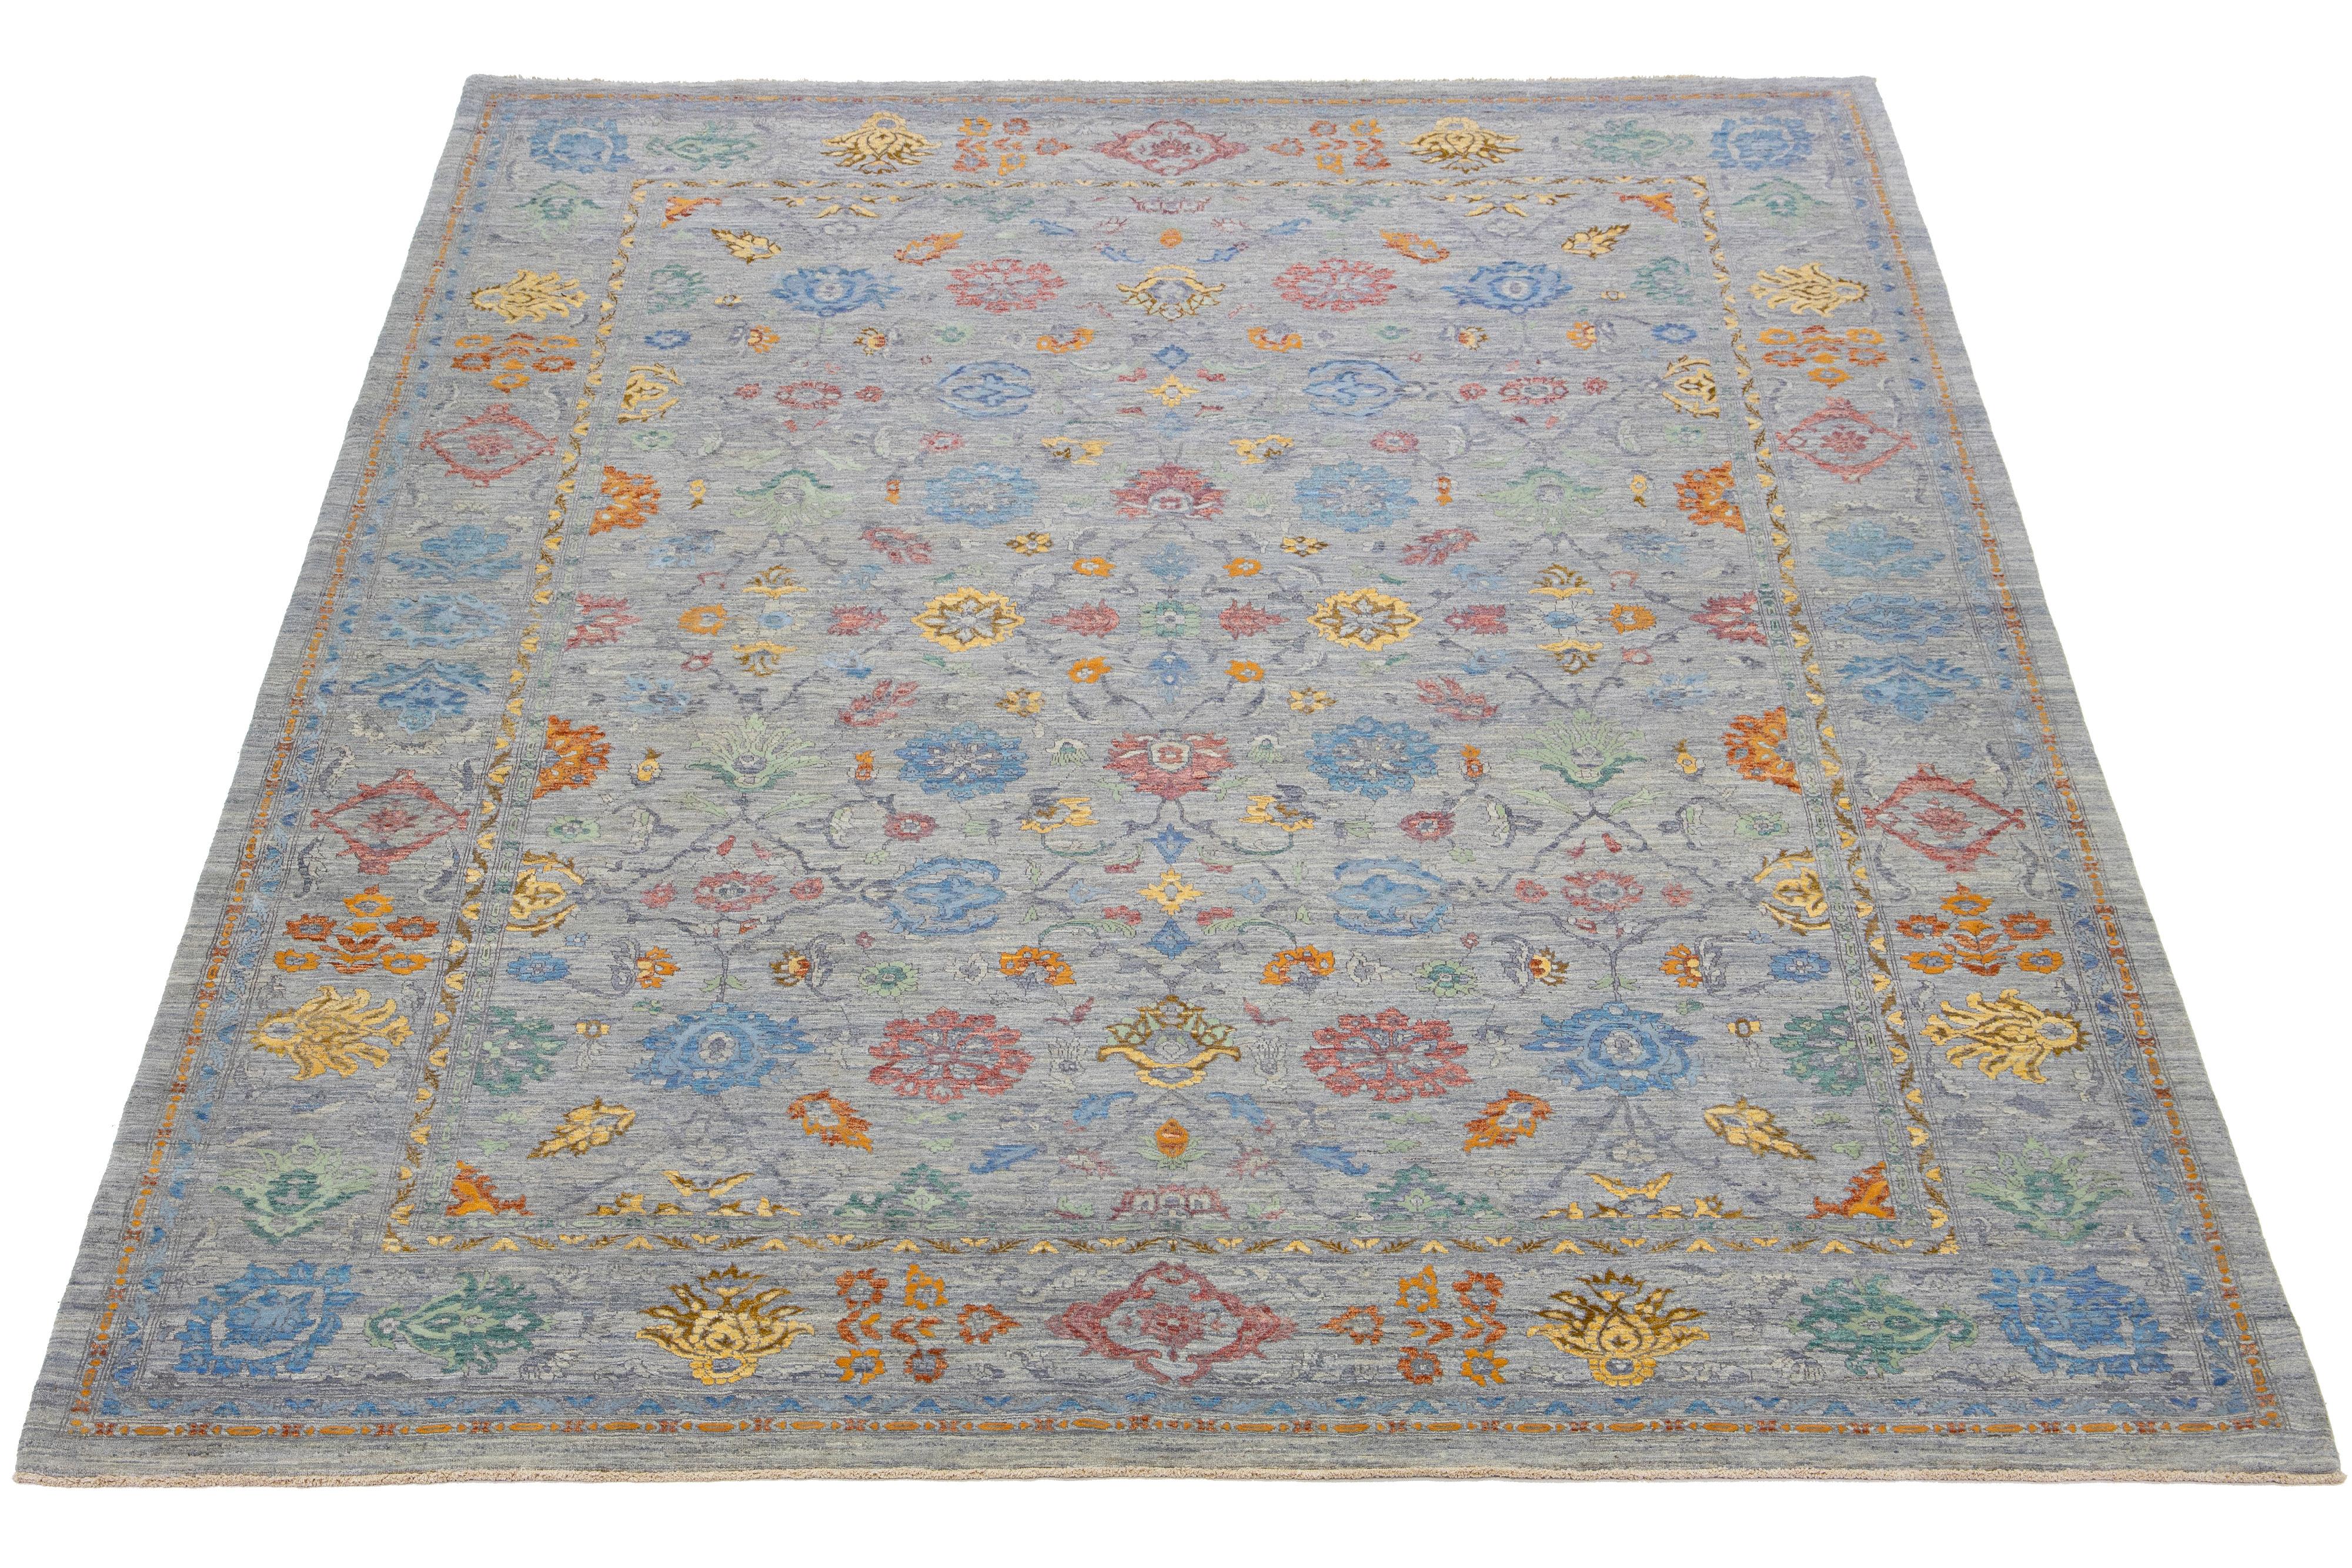 This hand-knotted wool and silk rug showcases a stunning gray-blue field with an all-over multicolor floral design. The addition of bright accents brings a touch of Transitional charm to its overall look.

This rug measures 10'2